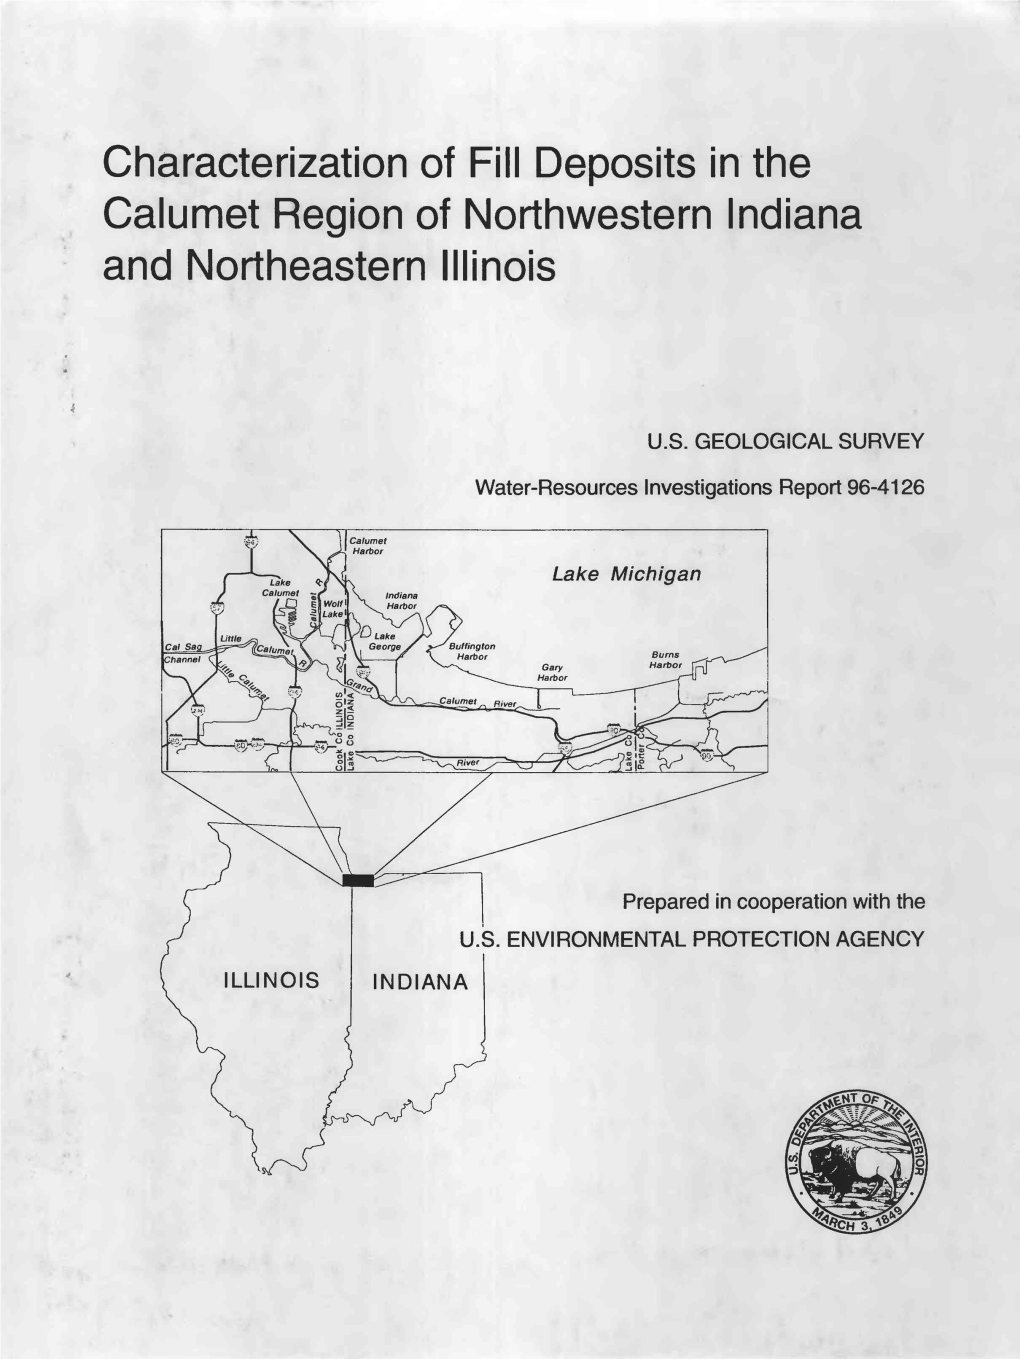 Characterization of Fill Deposits in the Calumet Region of Northwestern Indiana and Northeastern Illinois